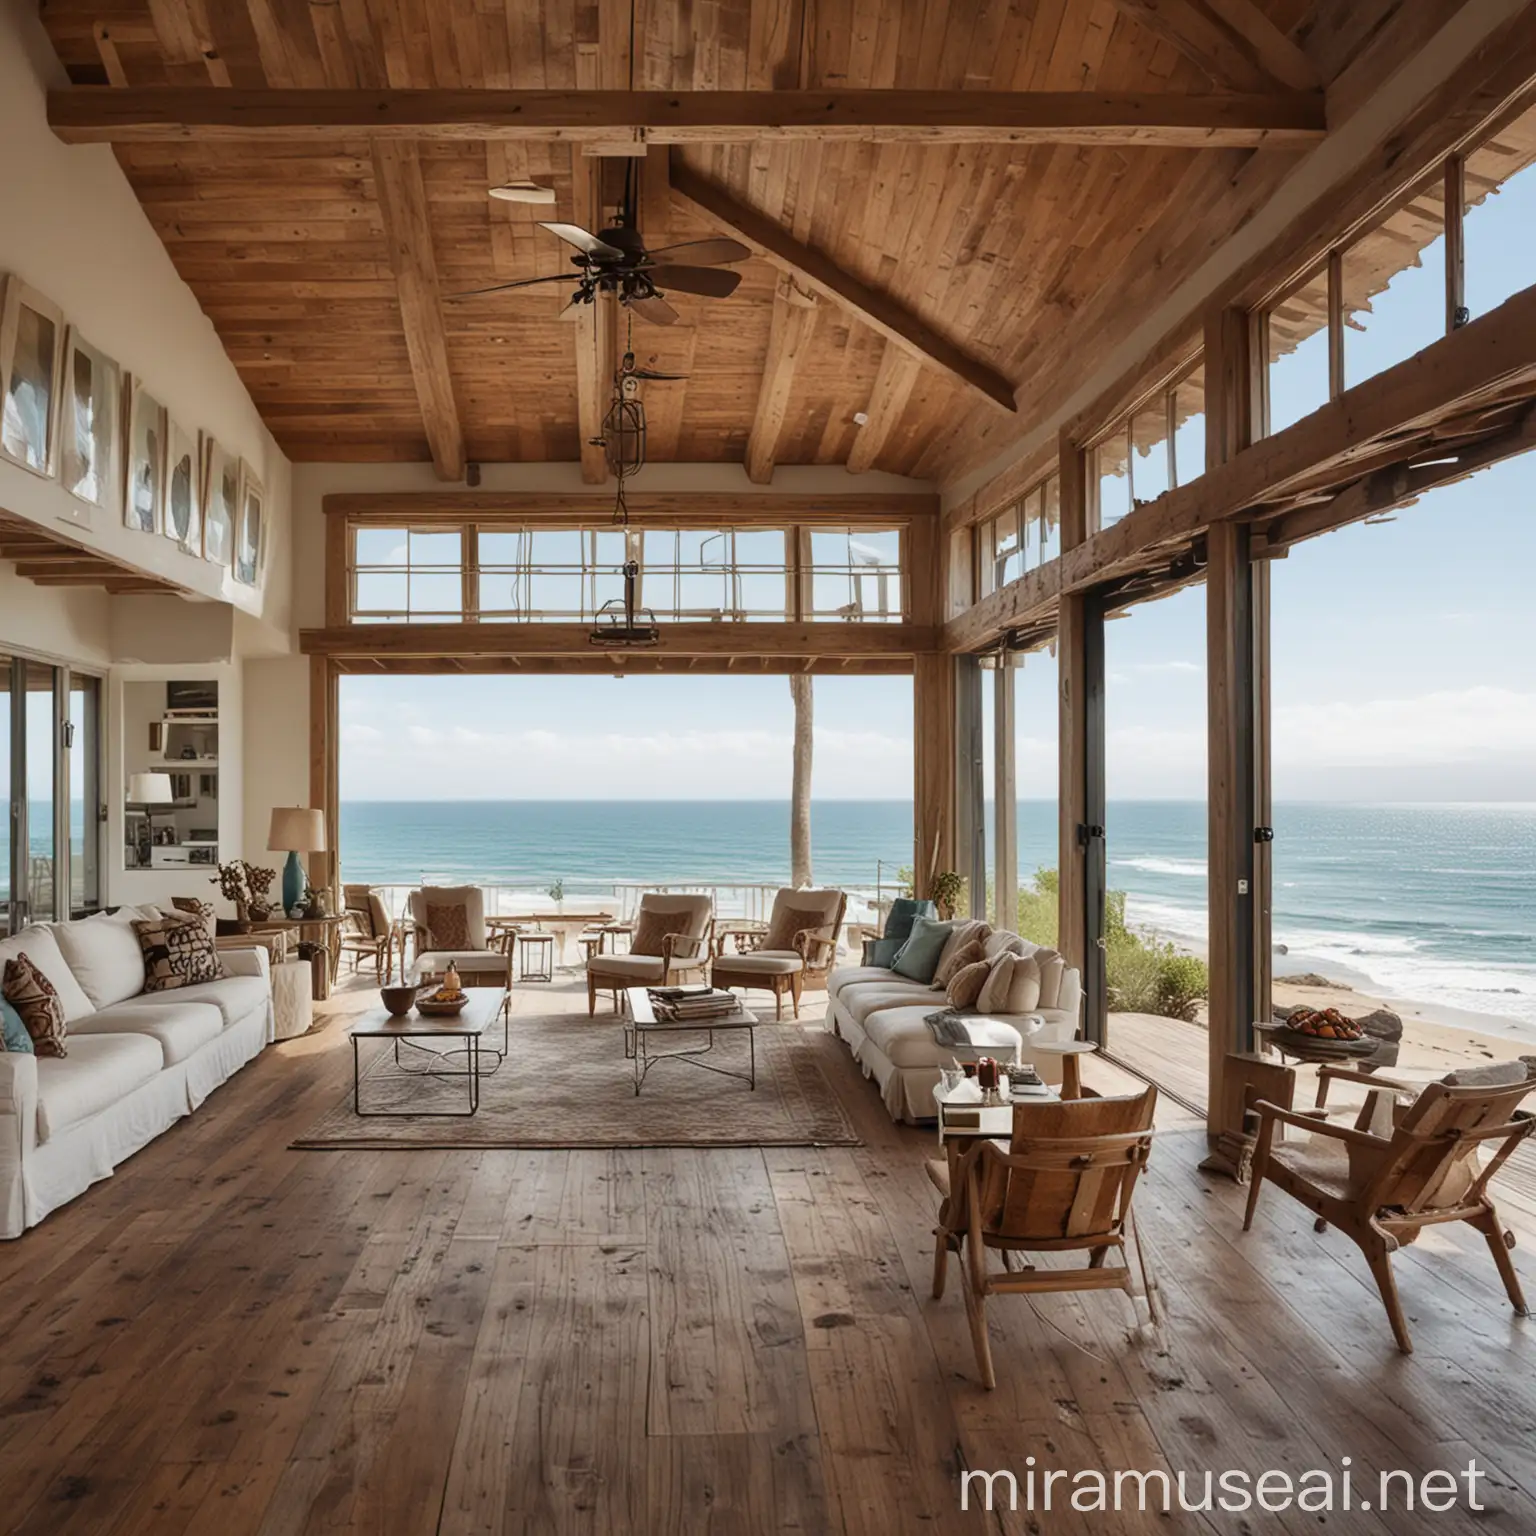 an amazing beach house interior looking out to the ocean